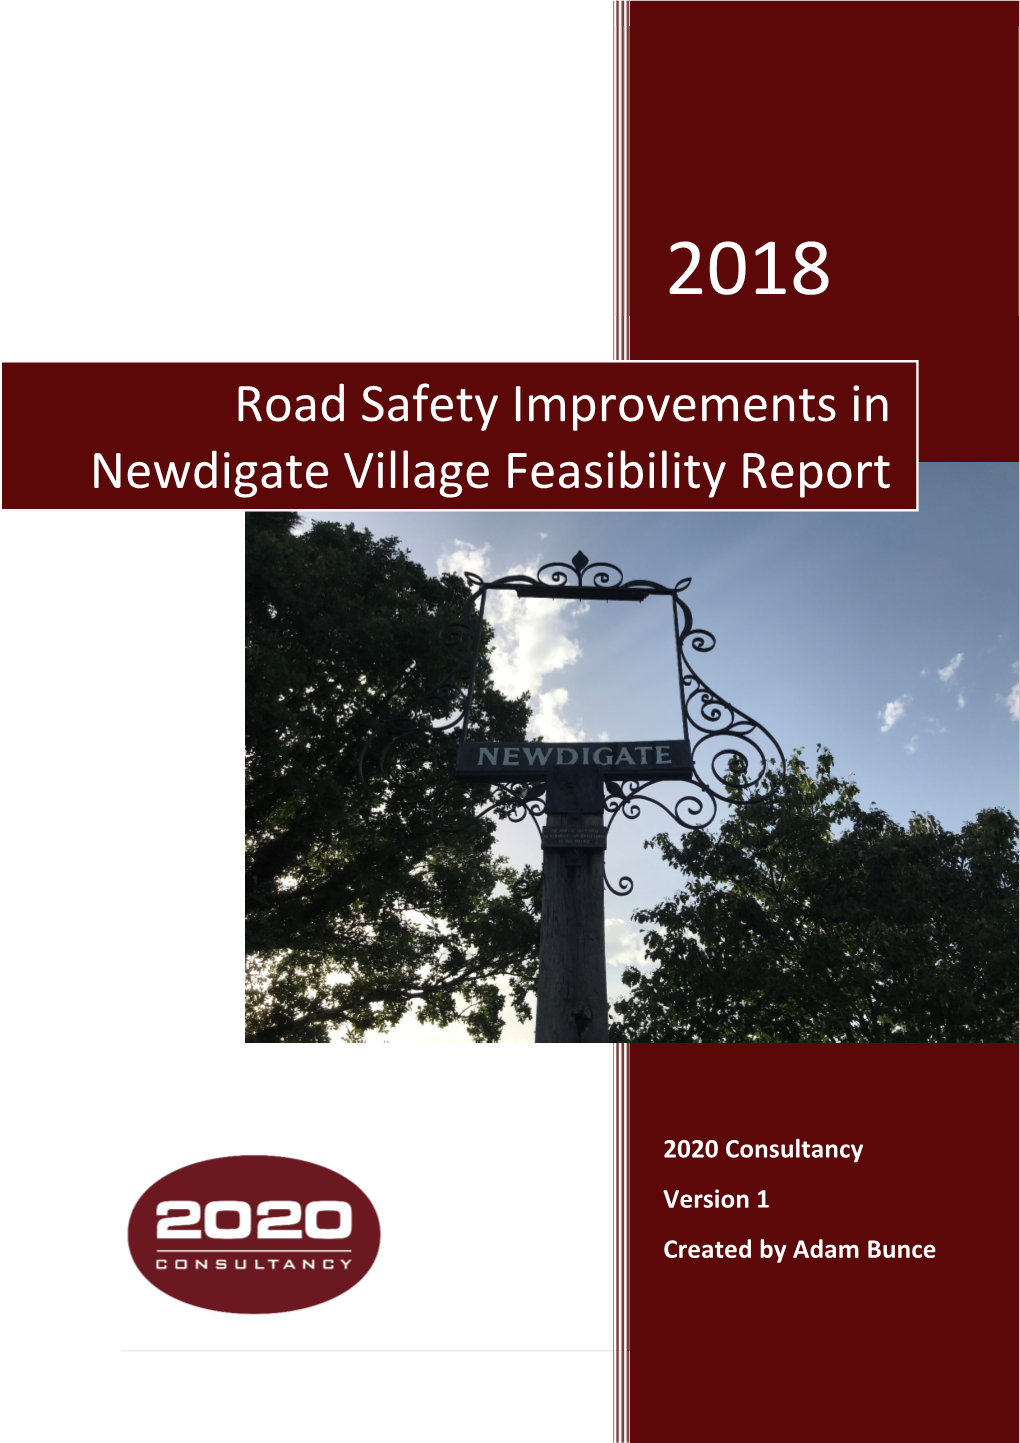 Road Safety Improvements in Newdigate Village Feasibility Report